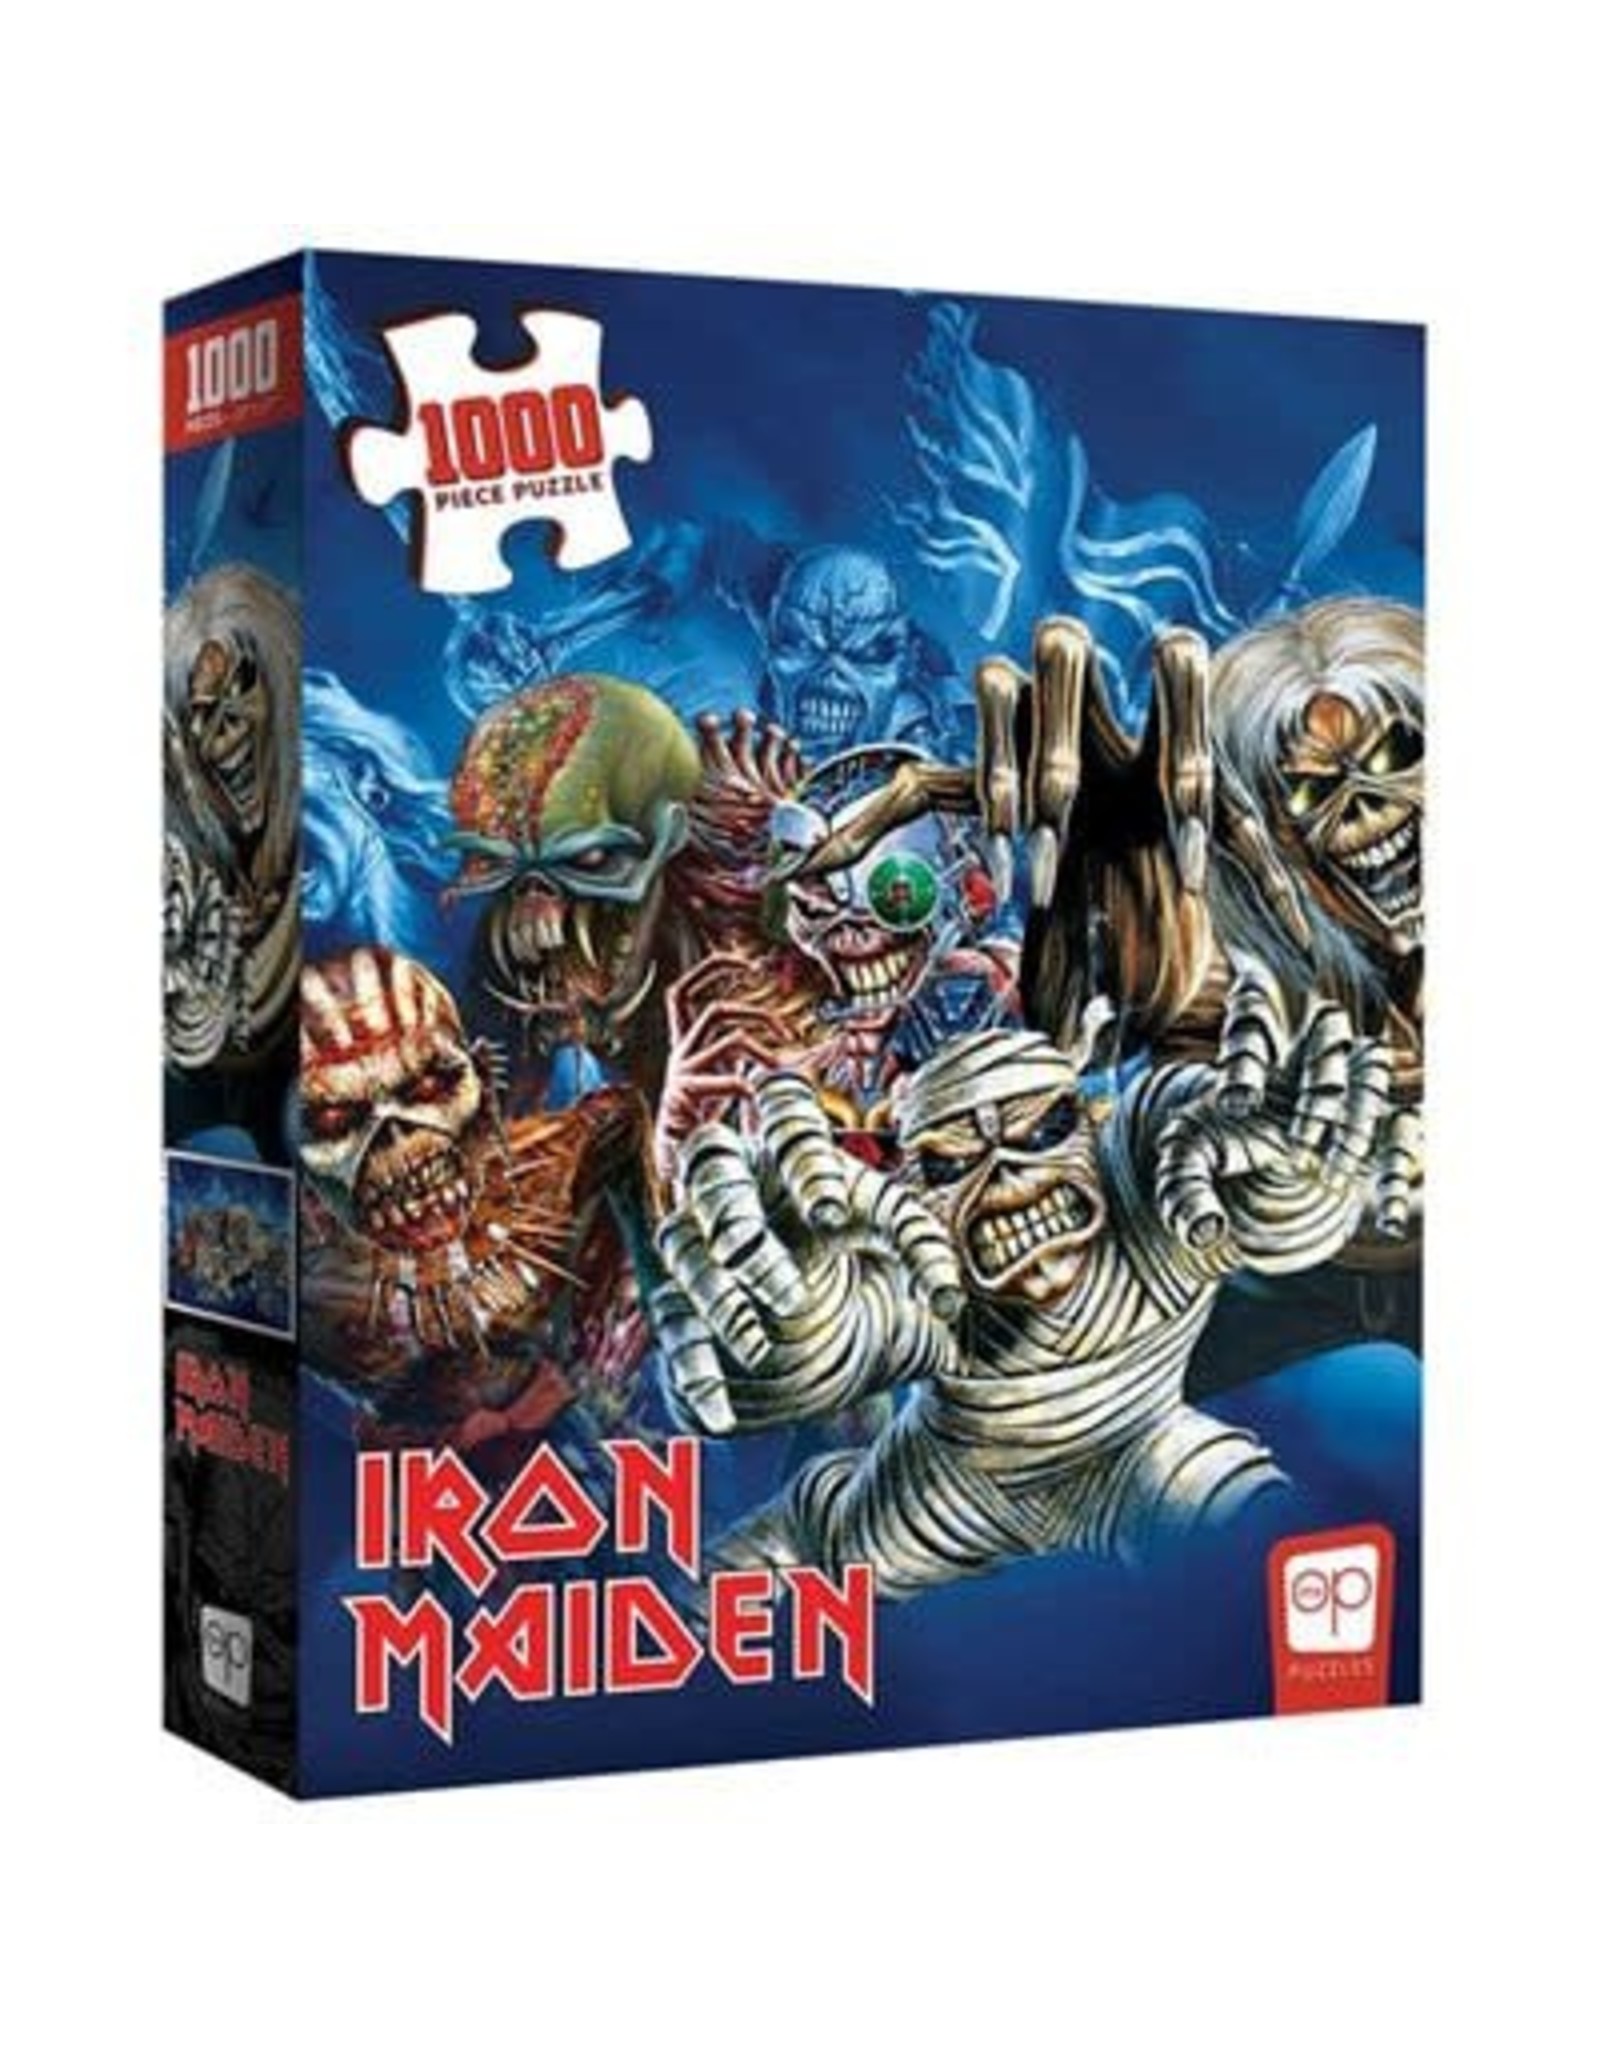 USAopoly Iron Maiden "Faces Of Eddie" Puzzle 1000 Pc